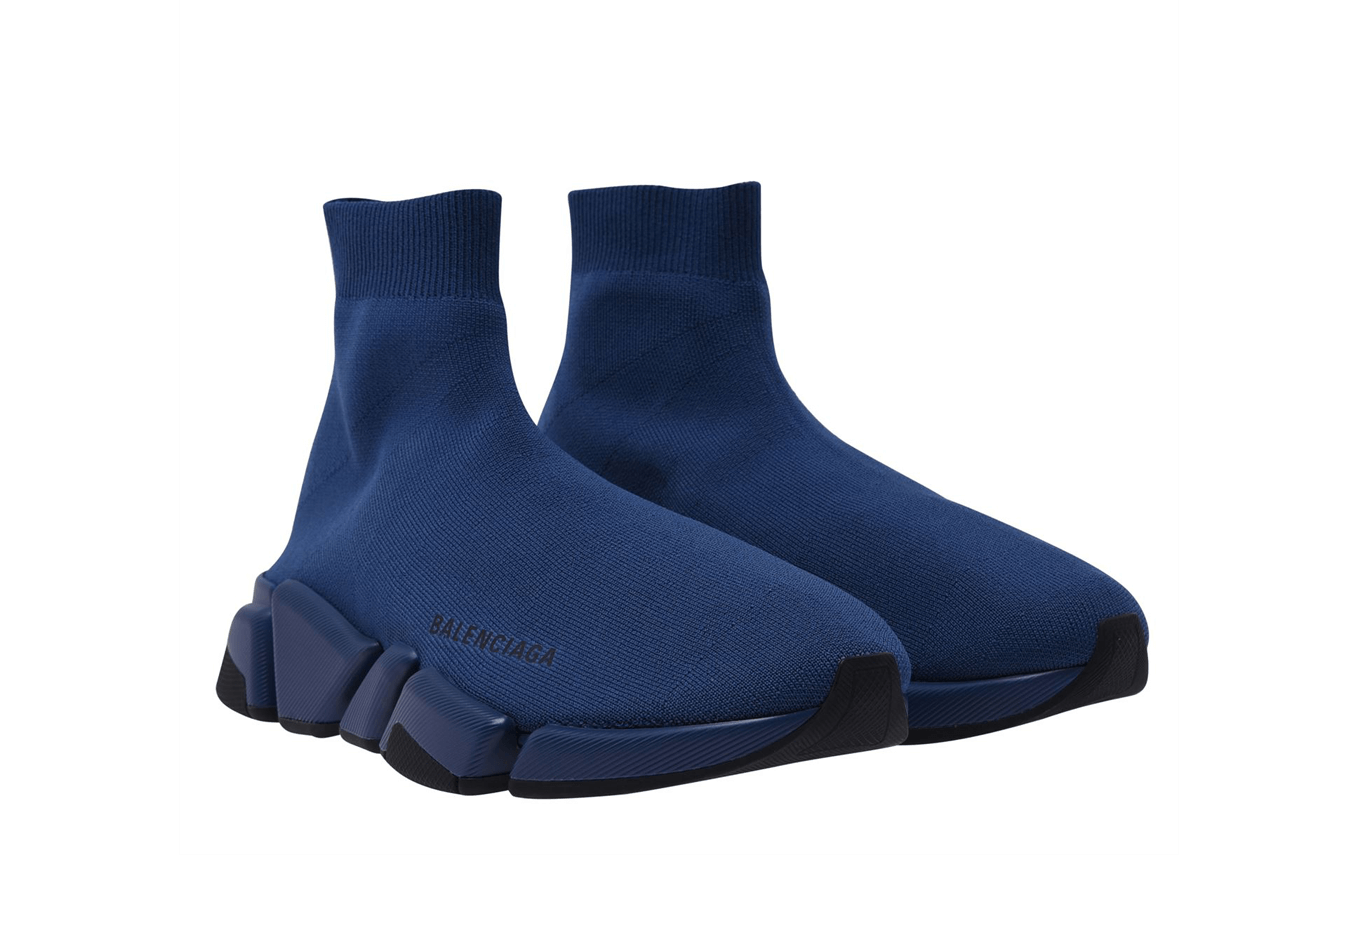 Best quality Balenciaga Speed Trainers 2.0 Navy for 225 USD